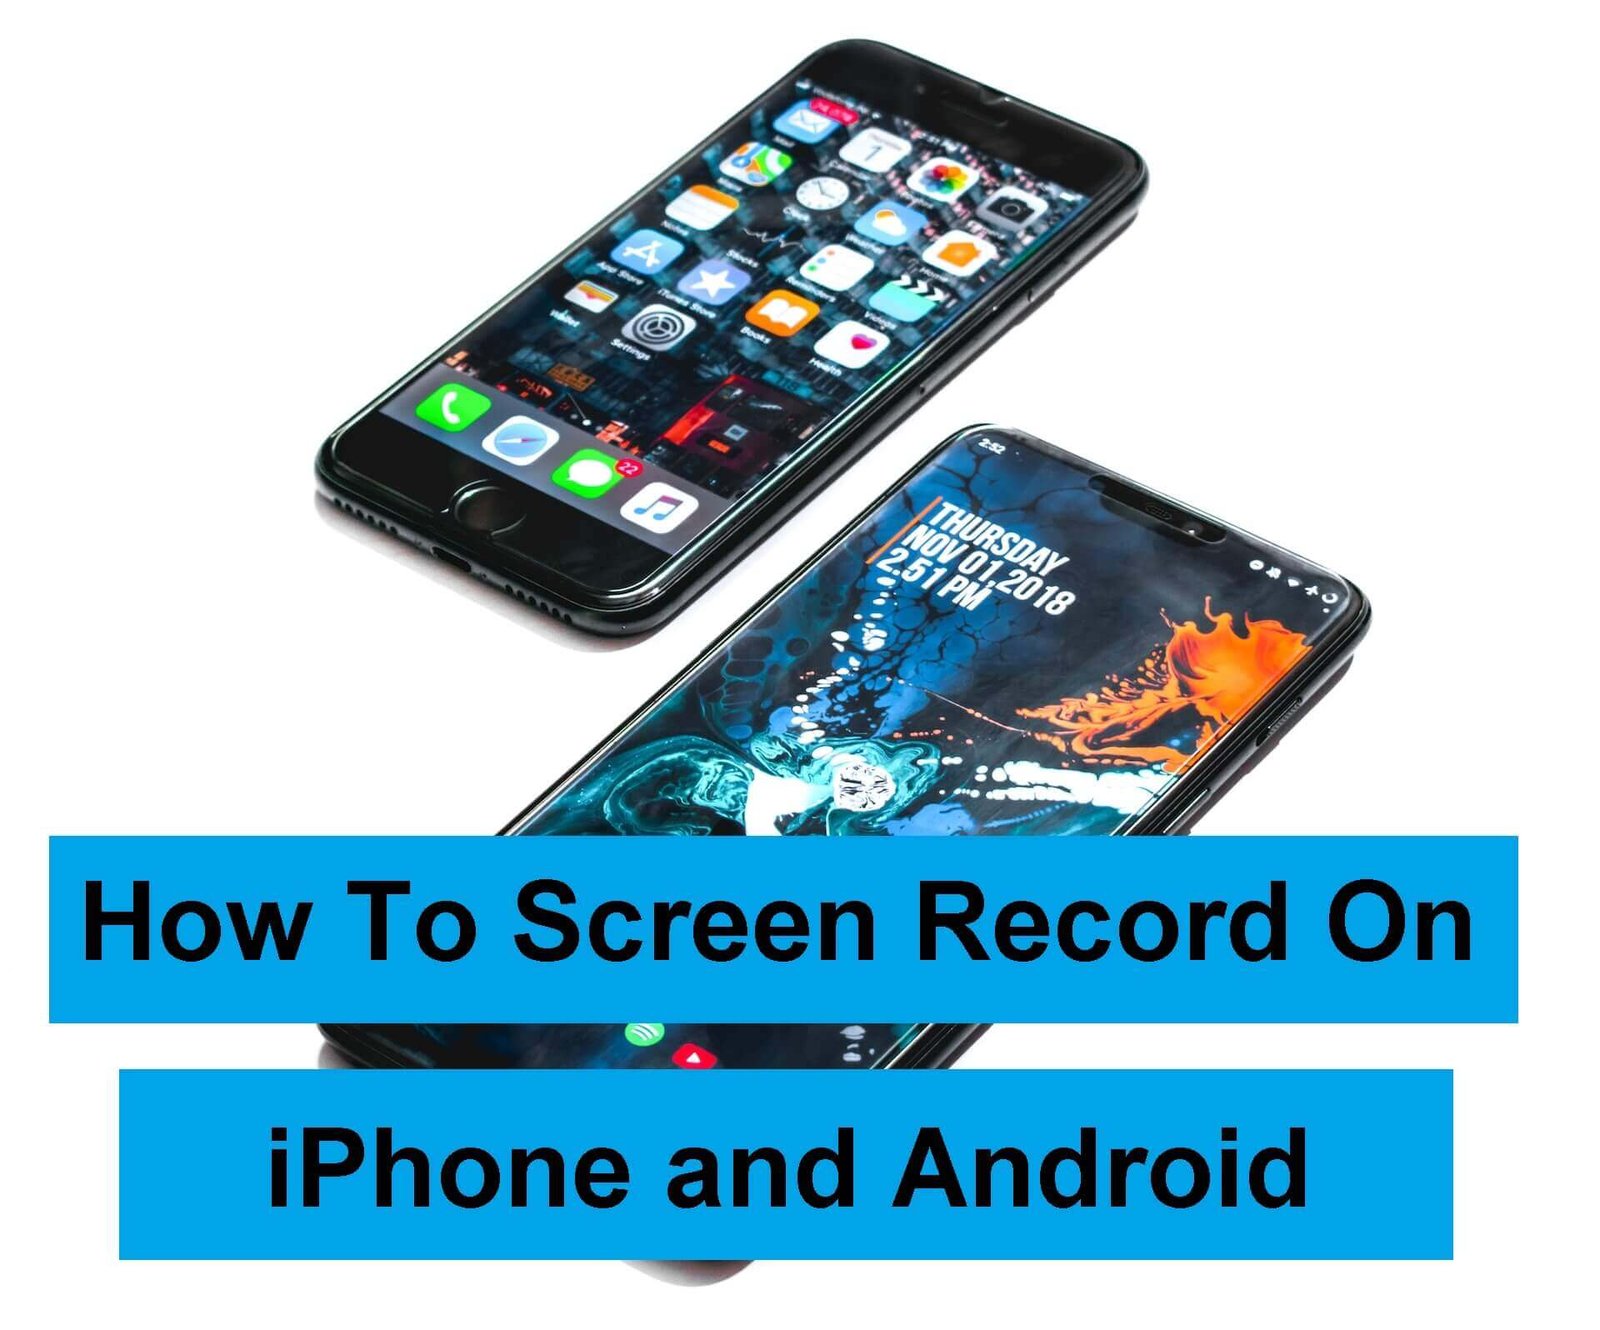 How To Screen Record On iPhone and Android